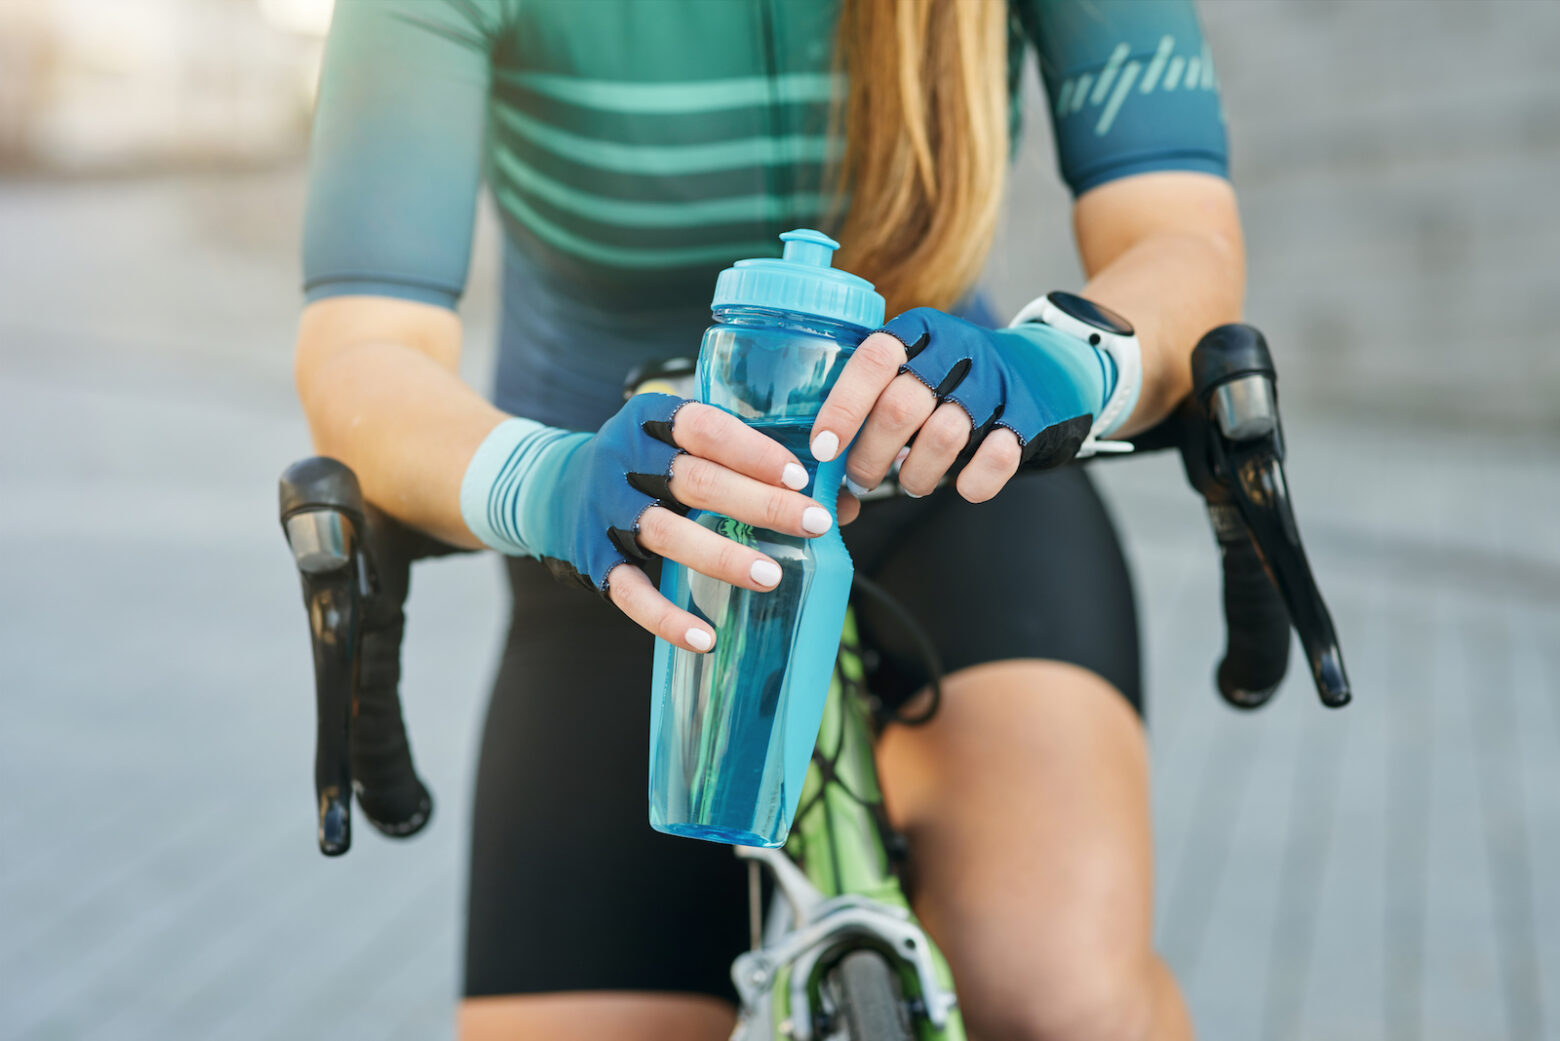 female cyclist holding water bottle on her bike